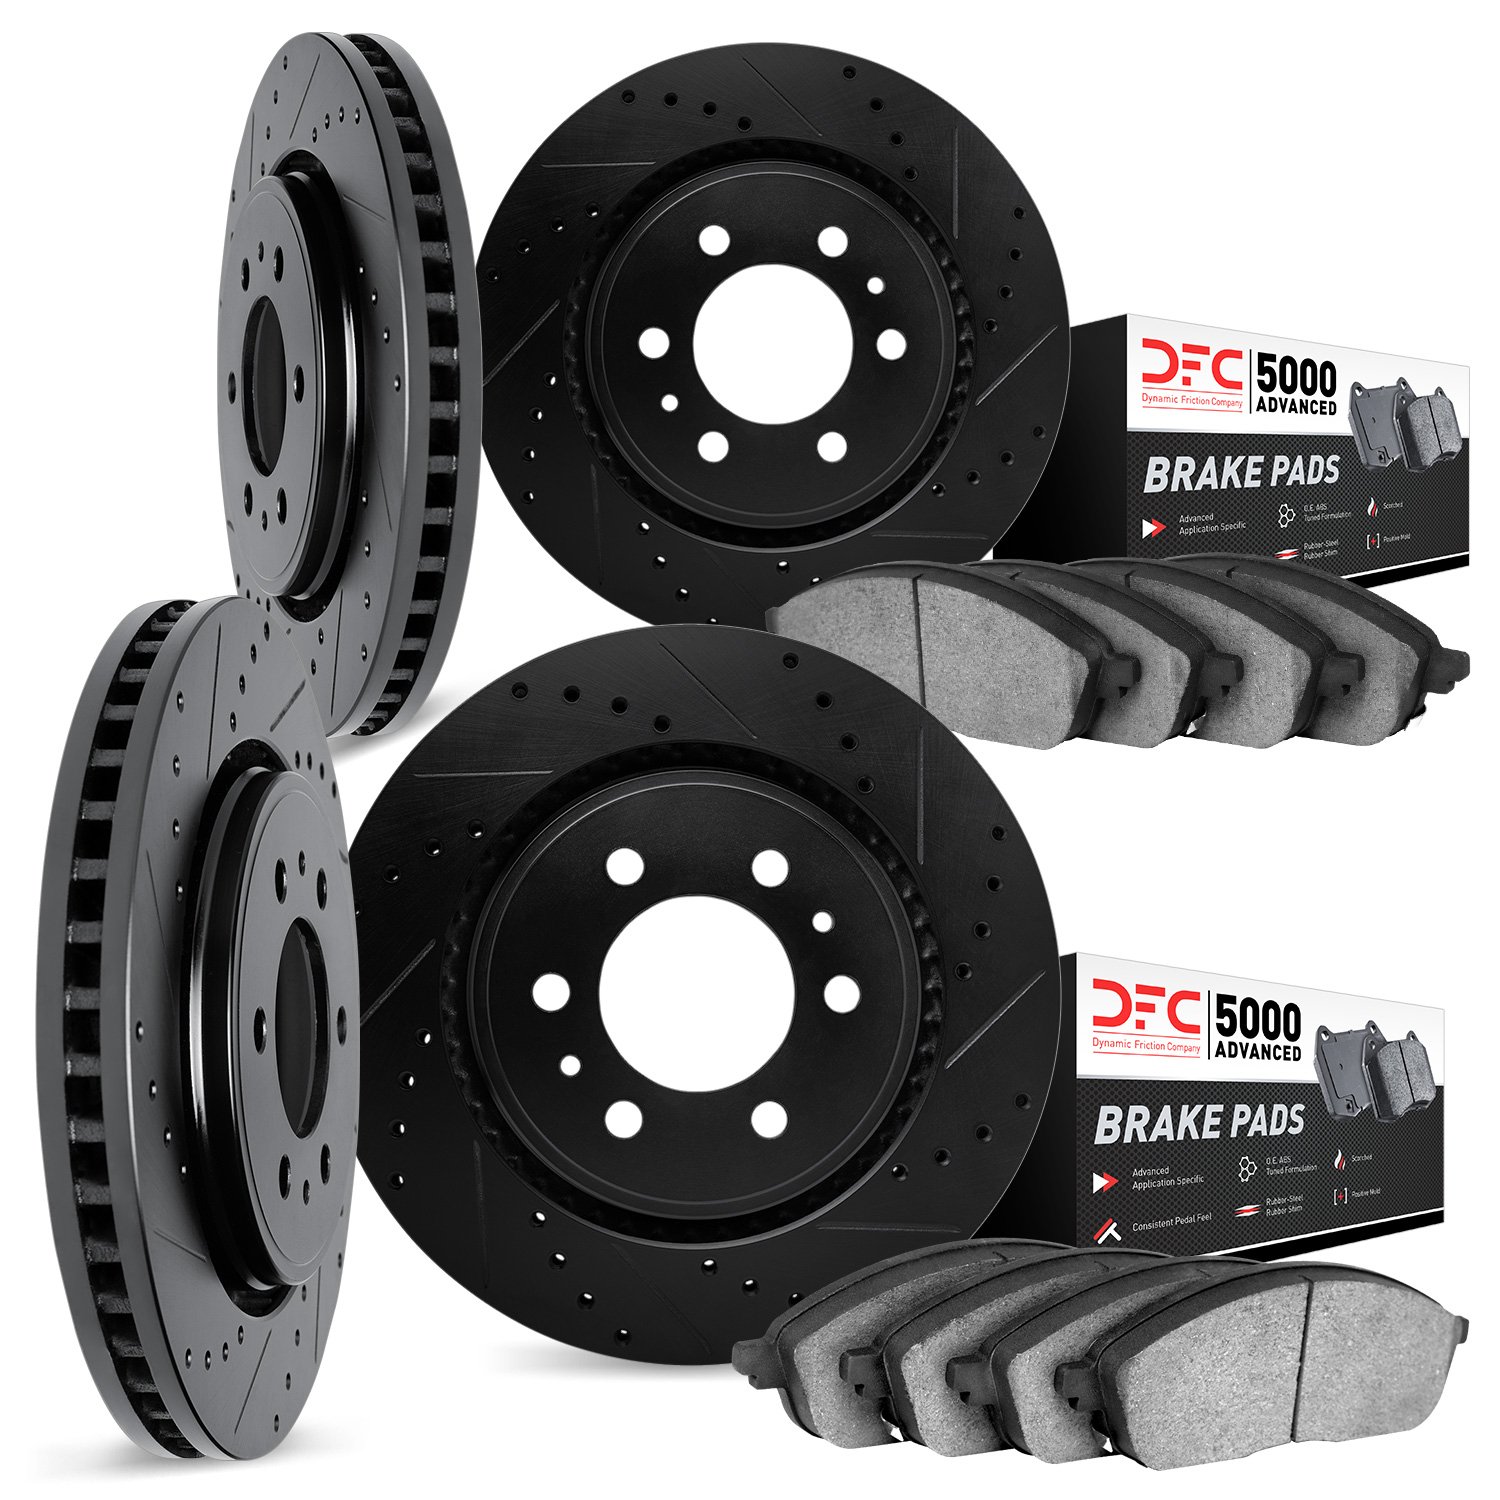 8504-40233 Drilled/Slotted Brake Rotors w/5000 Advanced Brake Pads Kit [Black], Fits Select Multiple Makes/Models, Position: Fro